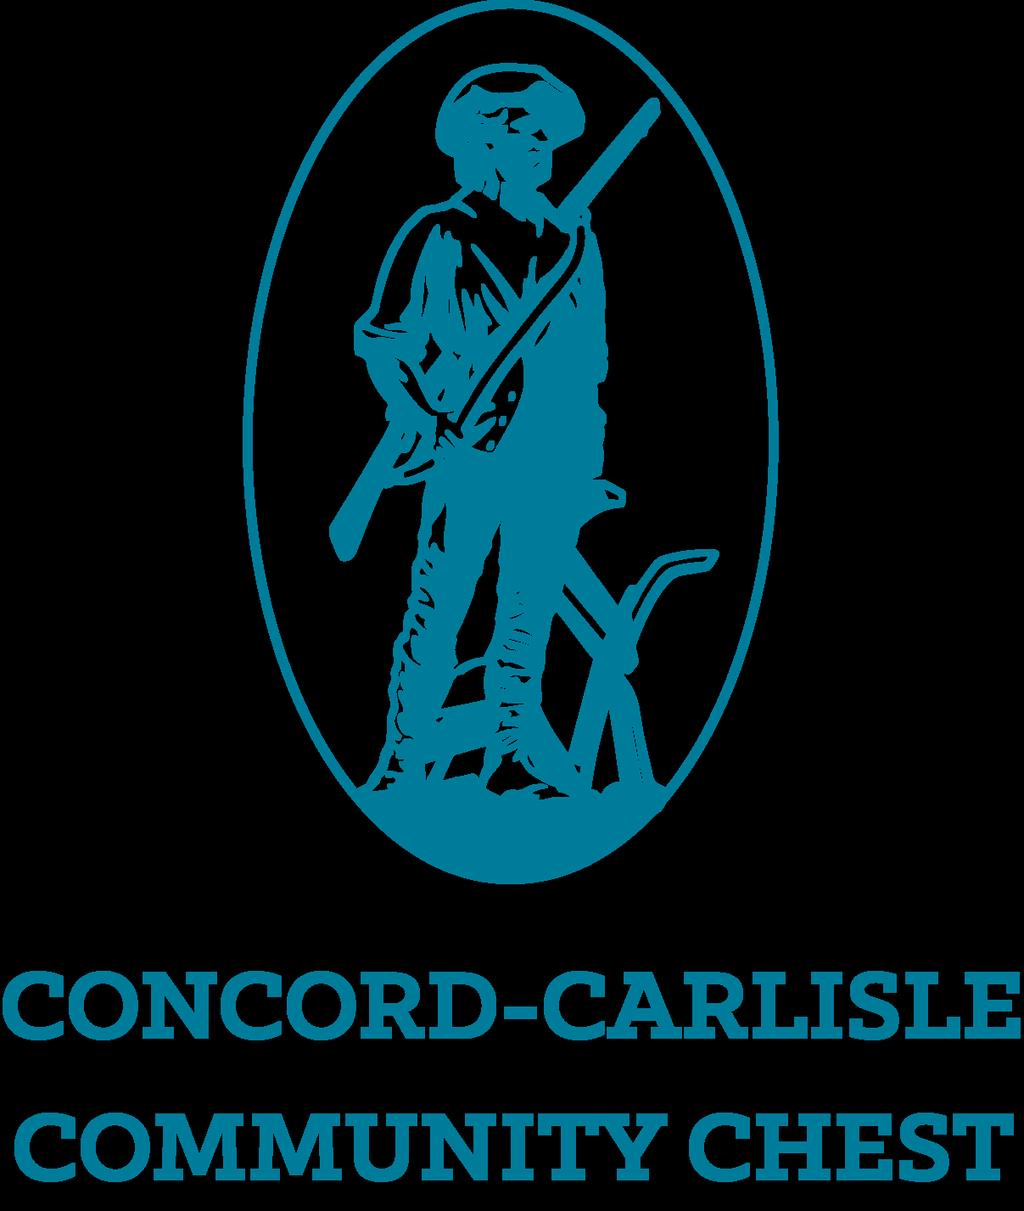 Concord-Carlisle Community Chest Grant Application 2019 REQUEST for PROPOSALS 2019 Please share this application with the appropriate person from your organization if you are not the correct contact